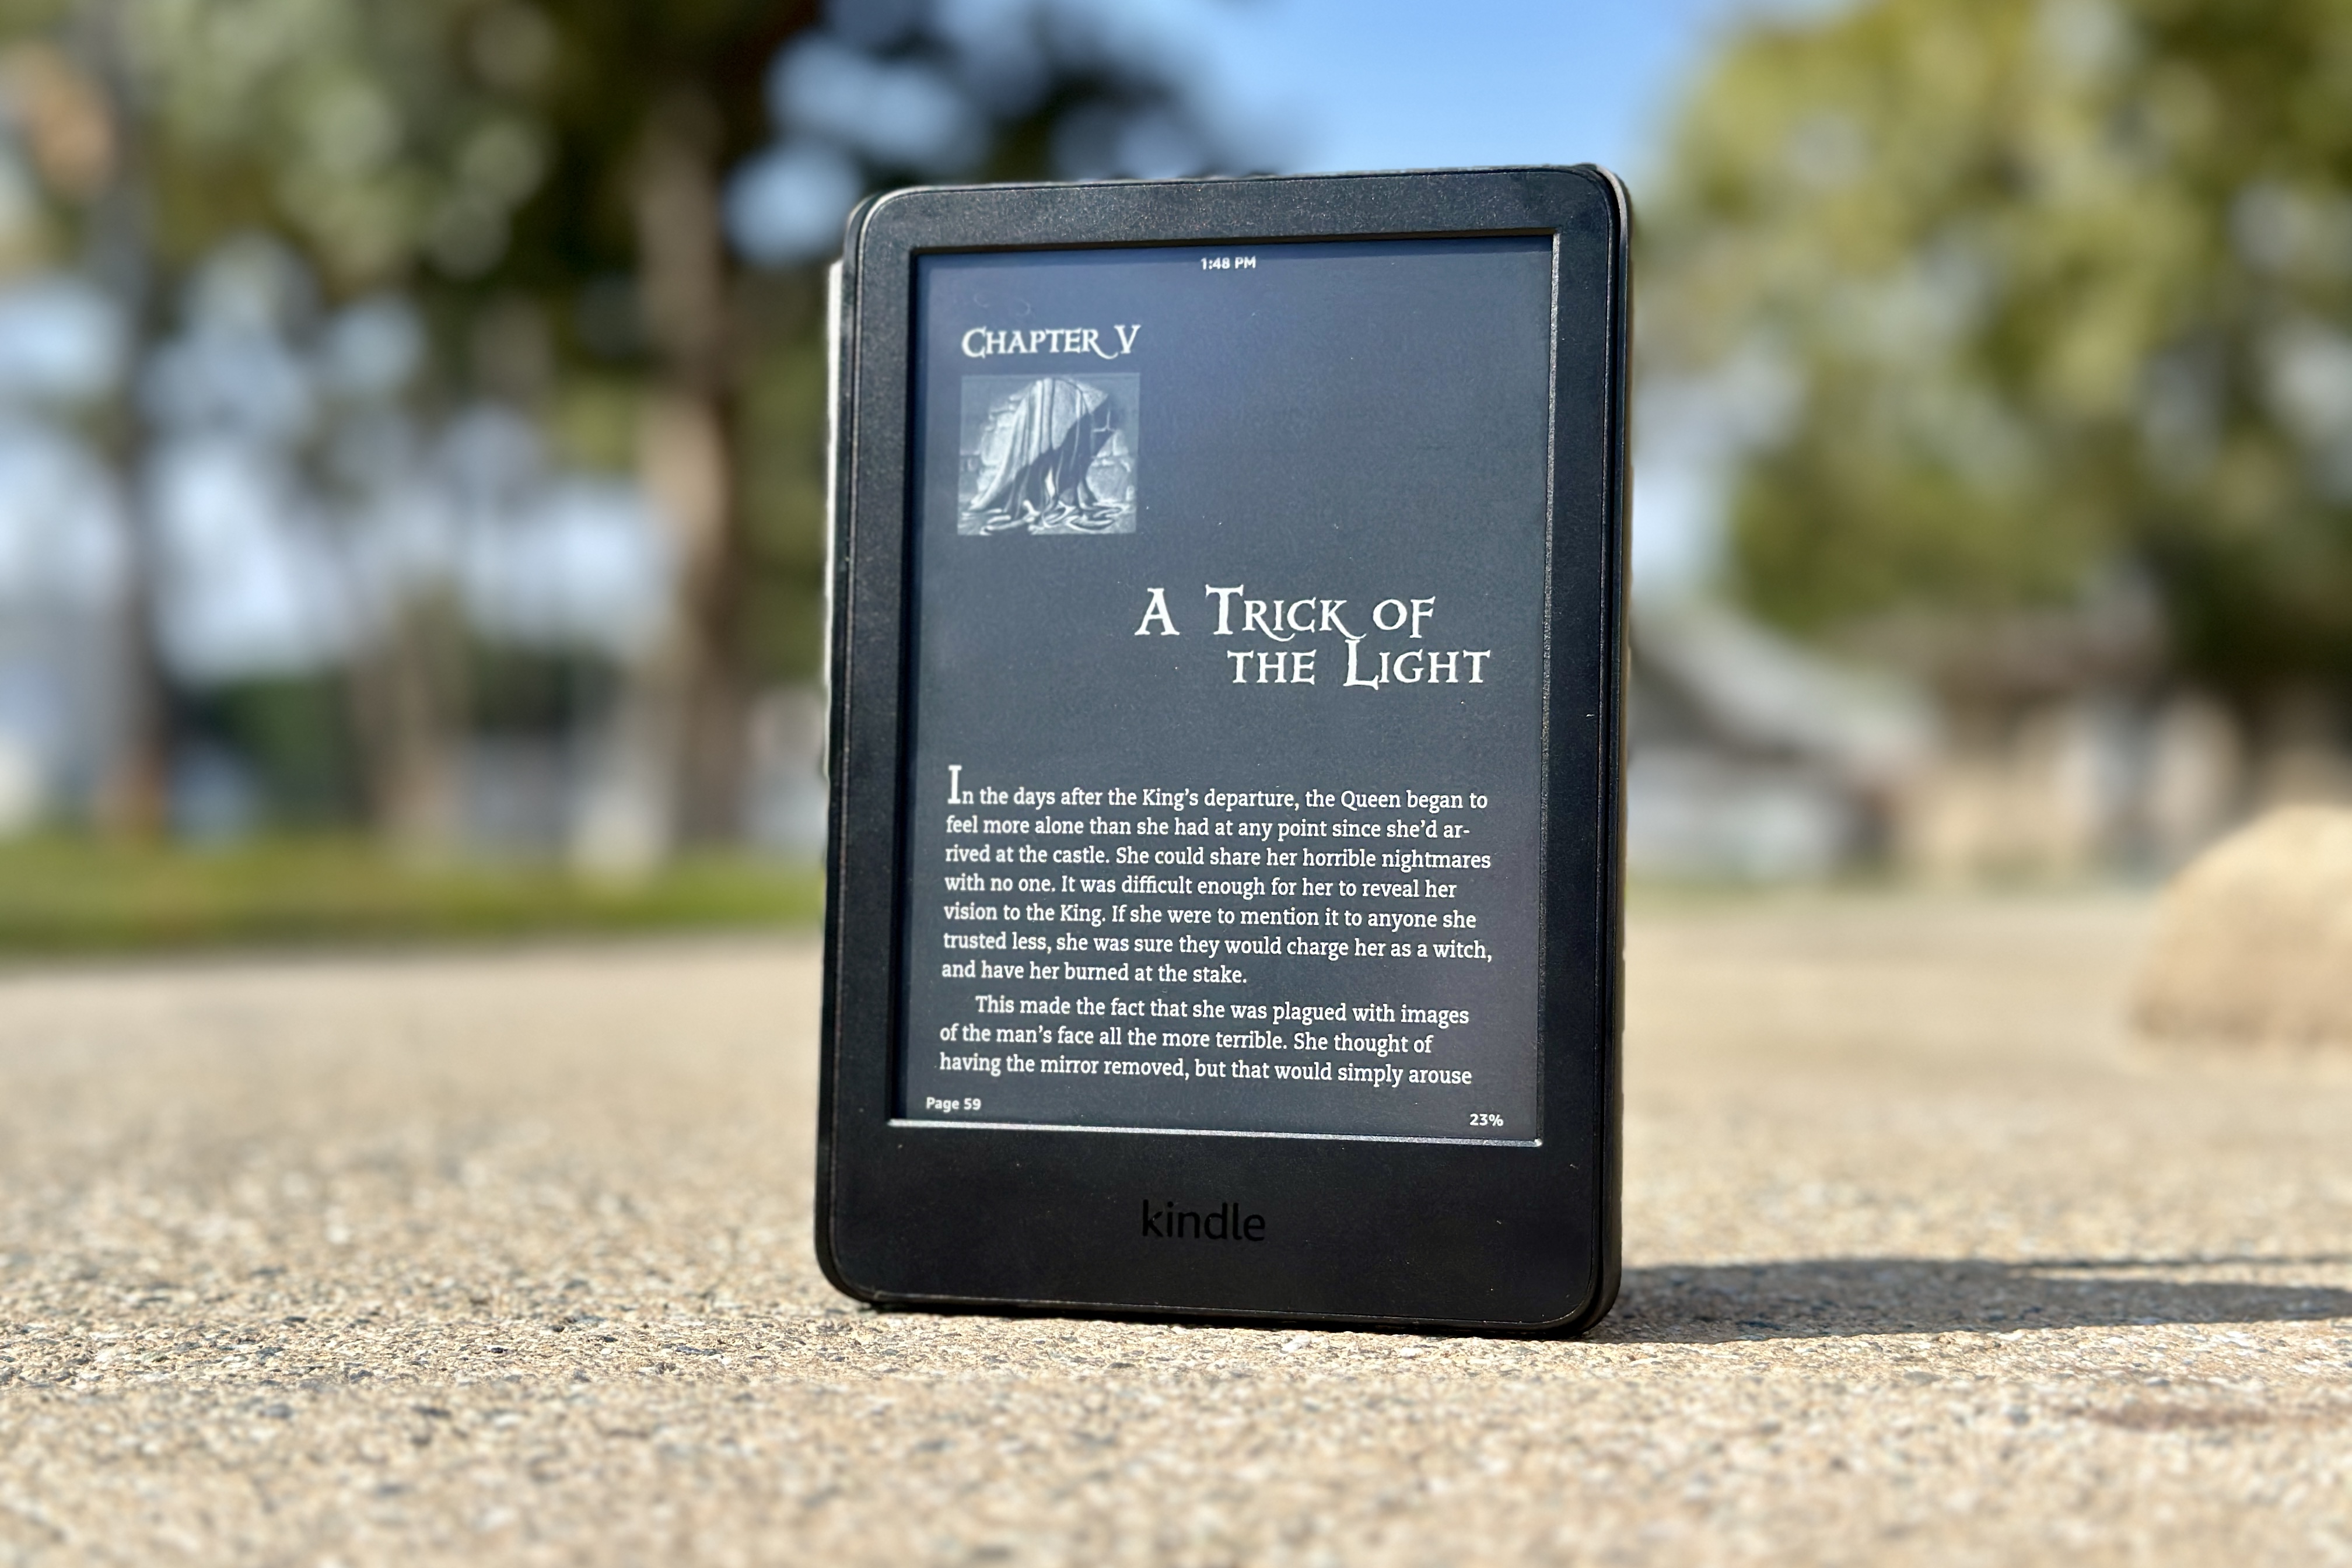 Kindle Unlimited Holiday Deal: How to Join for Free